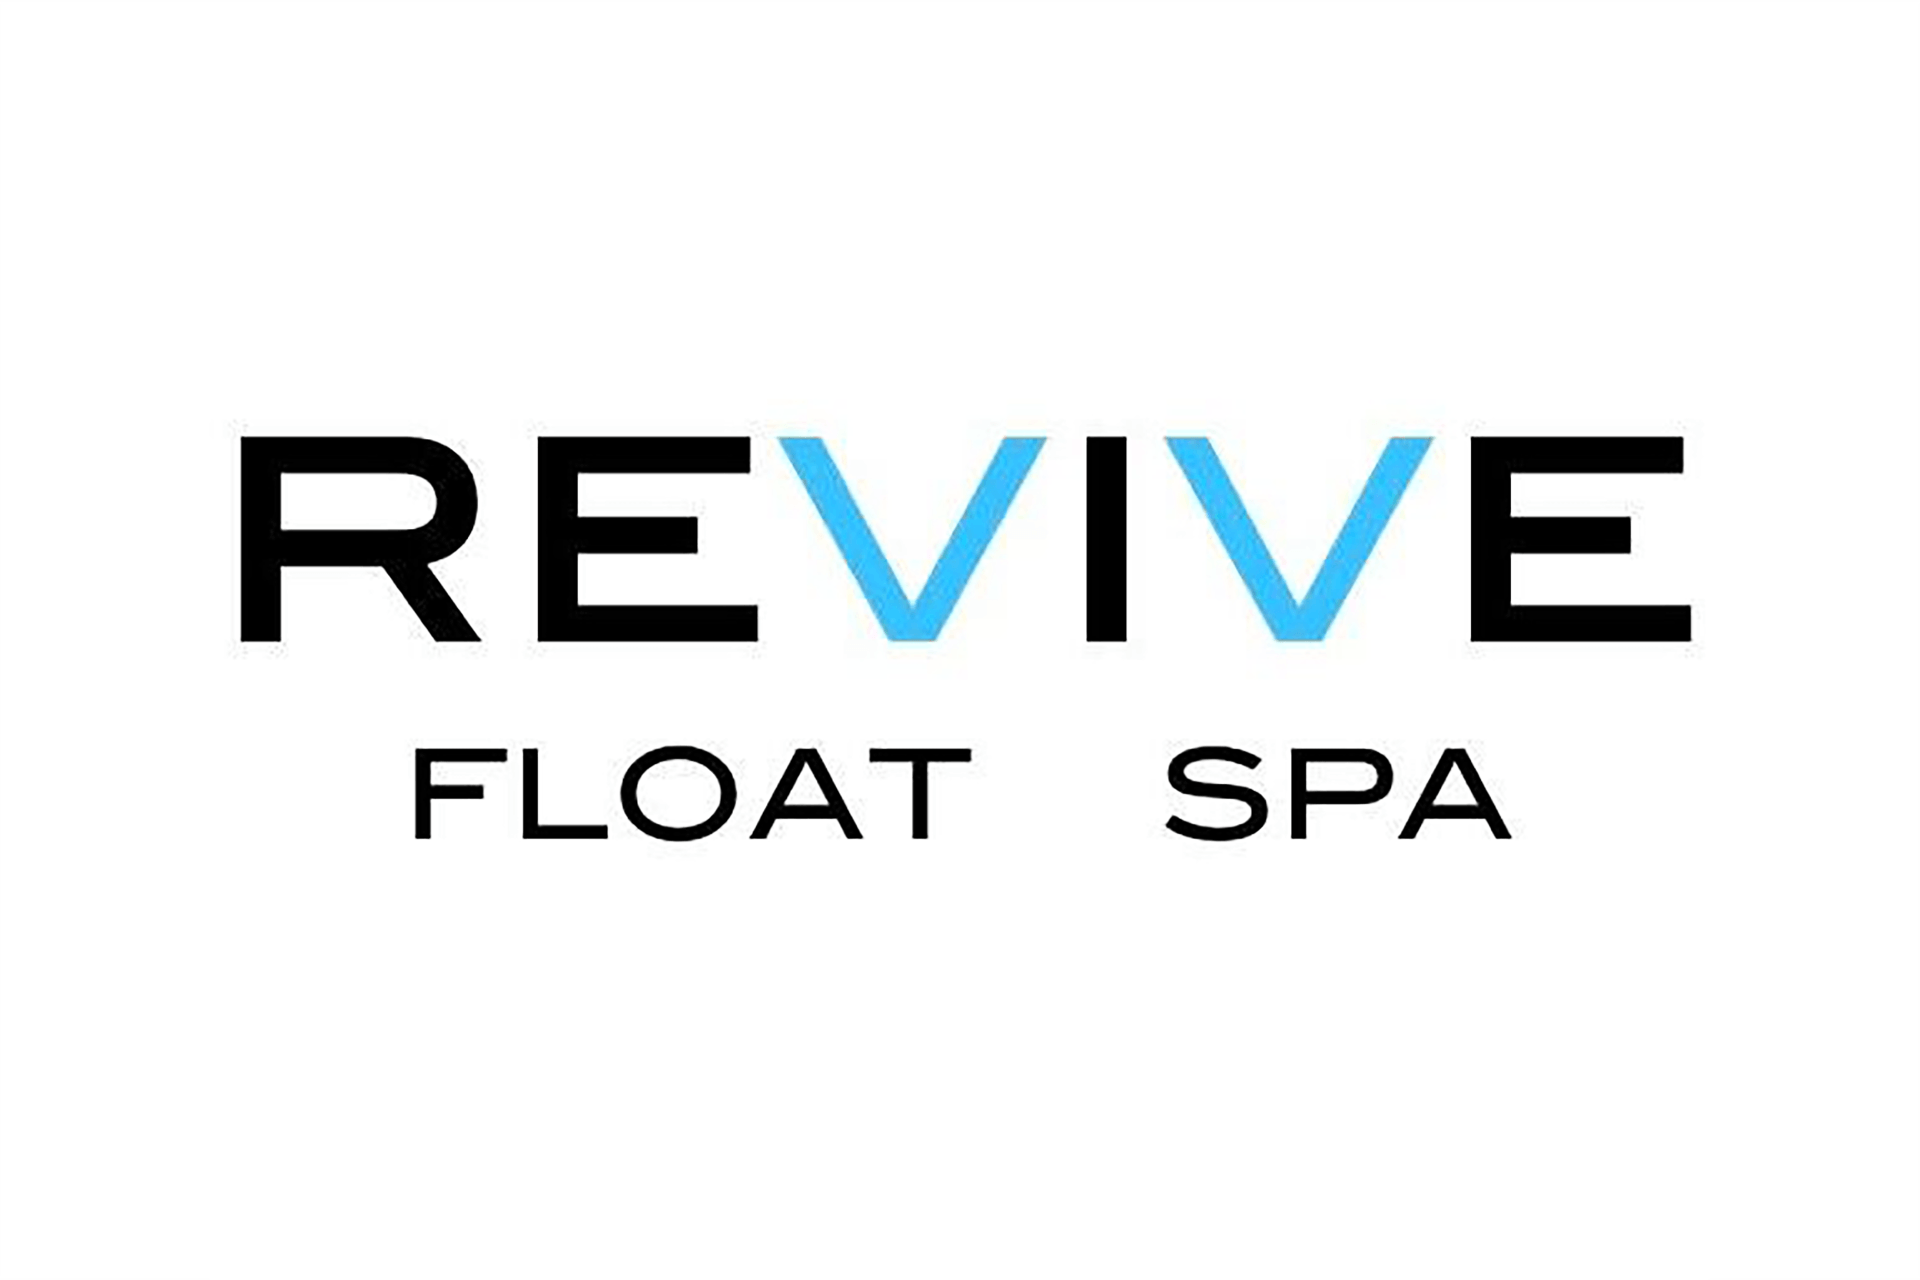 revive float spa shelby charter township, mi